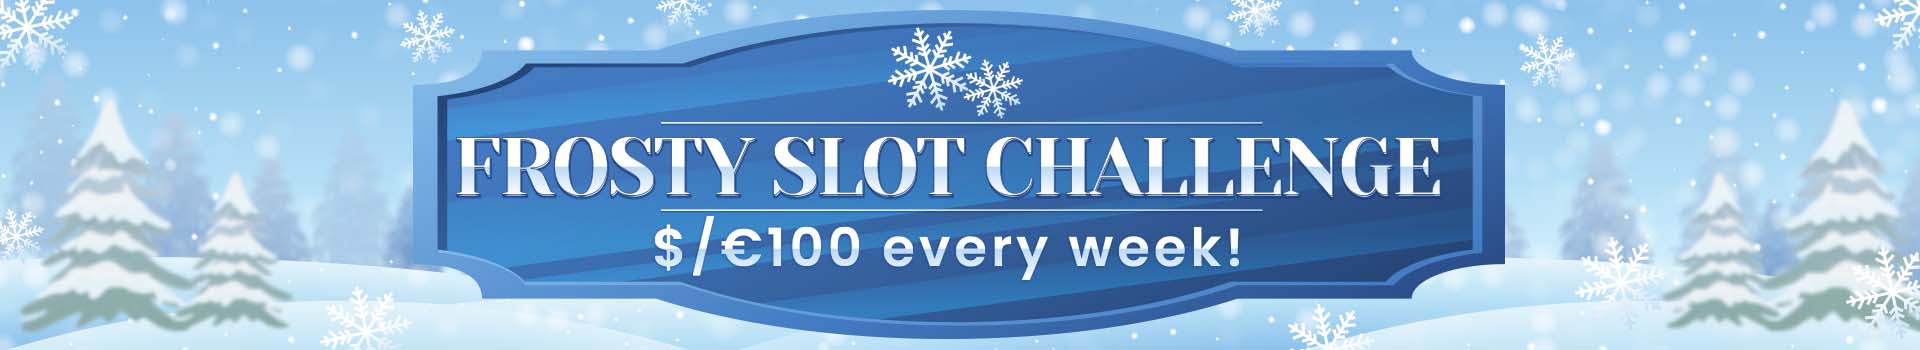  Promotional Banner frosty slot challenge